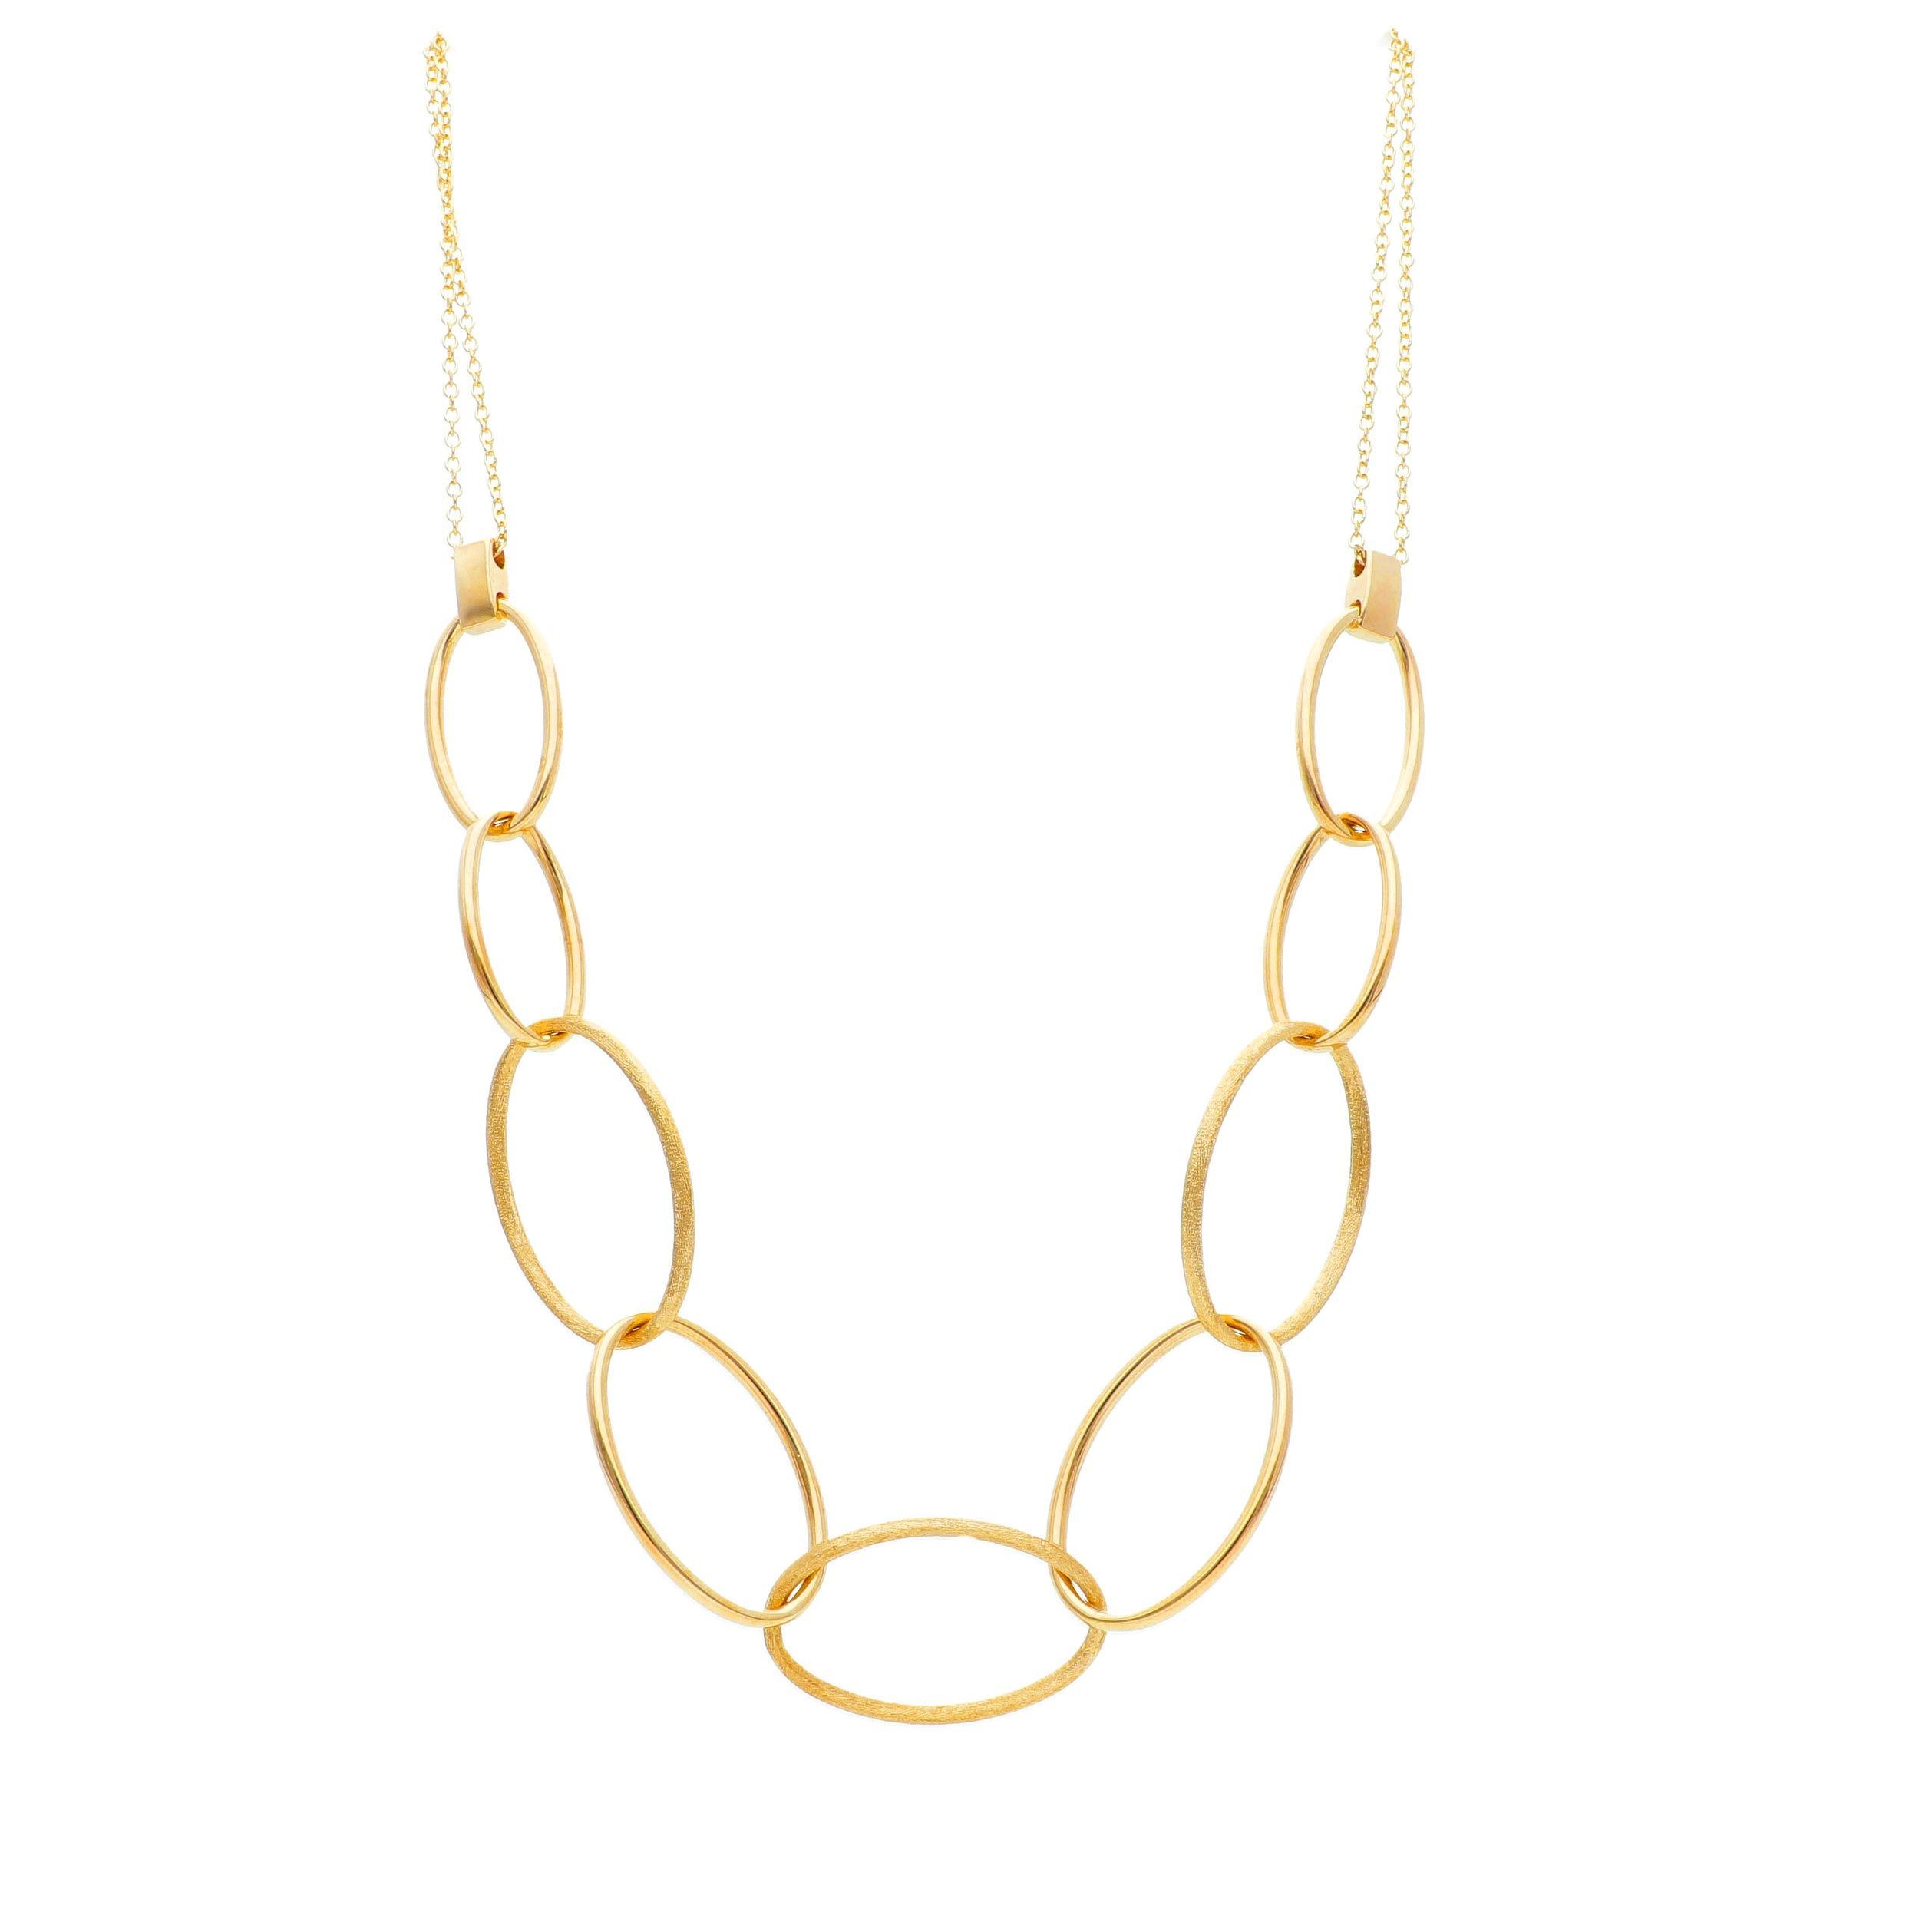 Golden necklace k14 with oval gold rings (code S246028)